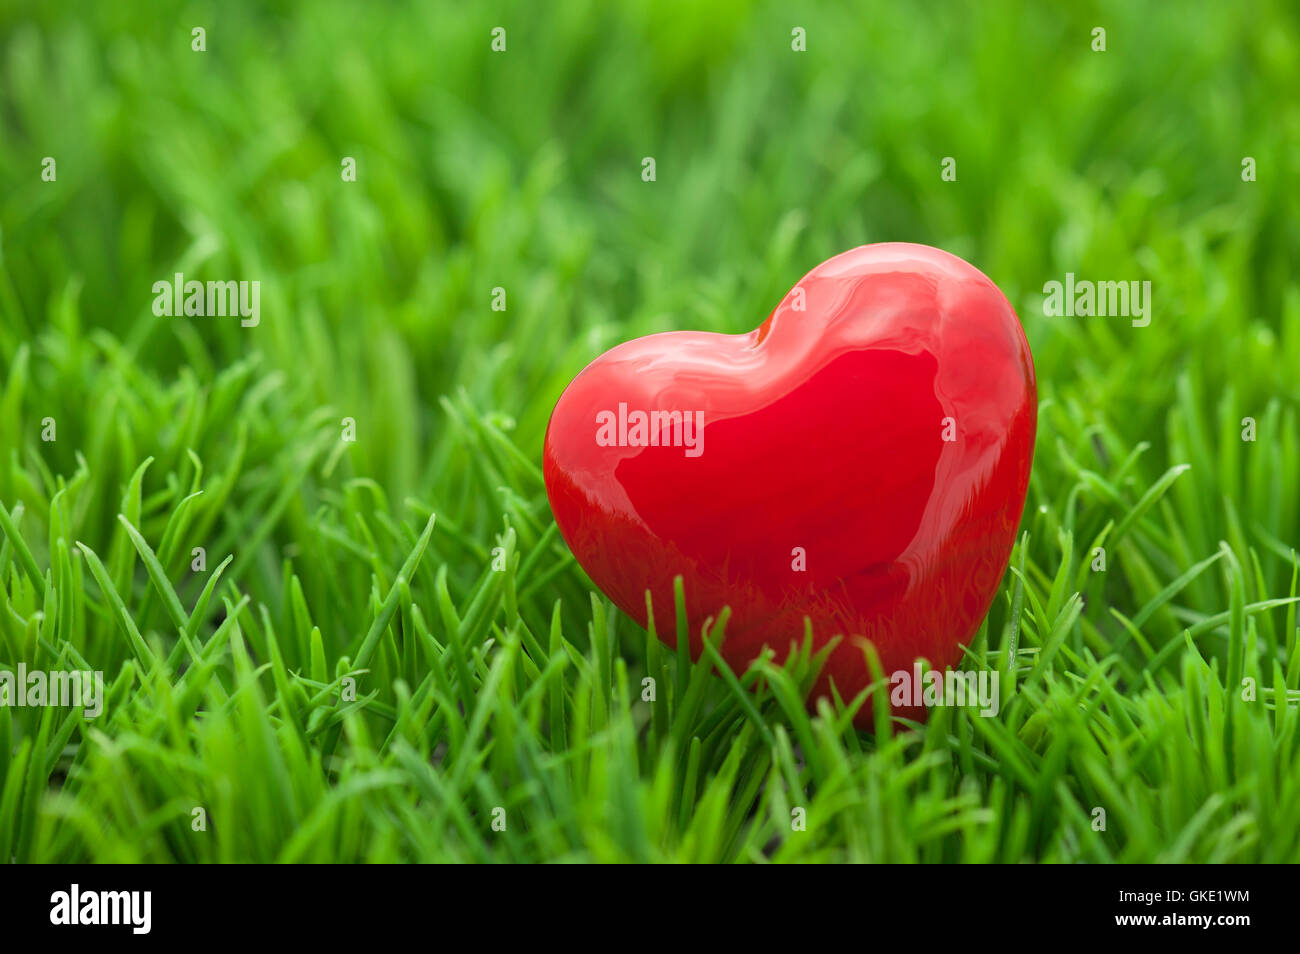 Small red heart on the grass Stock Photo